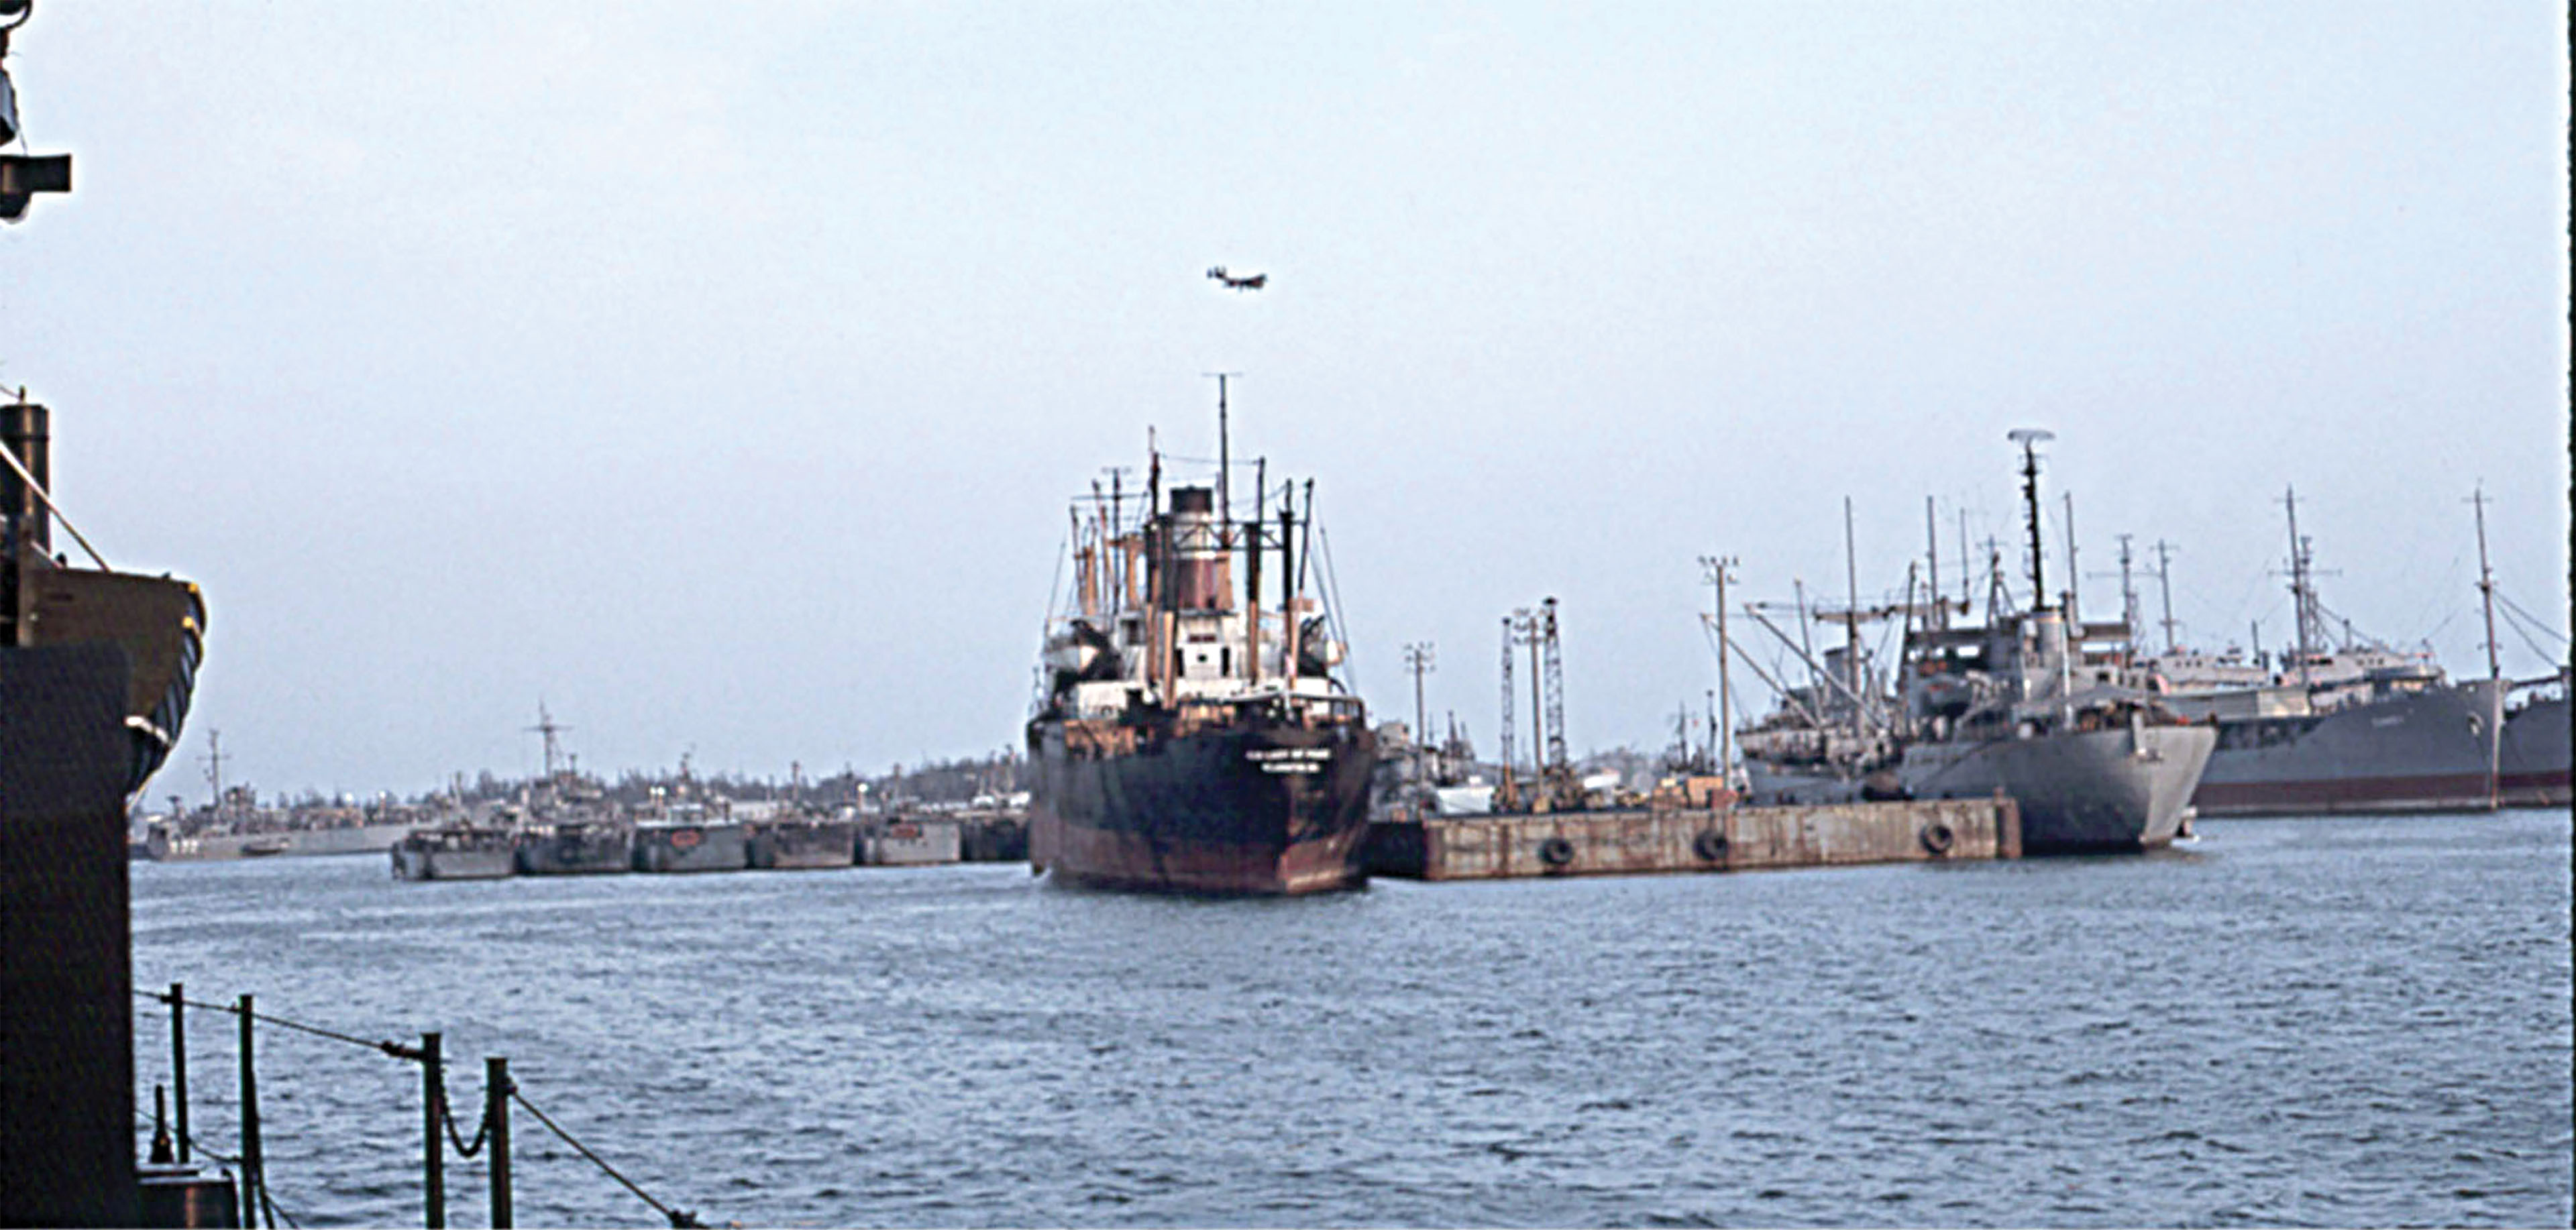 Supply ships at the busy port in Cam Ranh Bay. / HistoryNet Archives